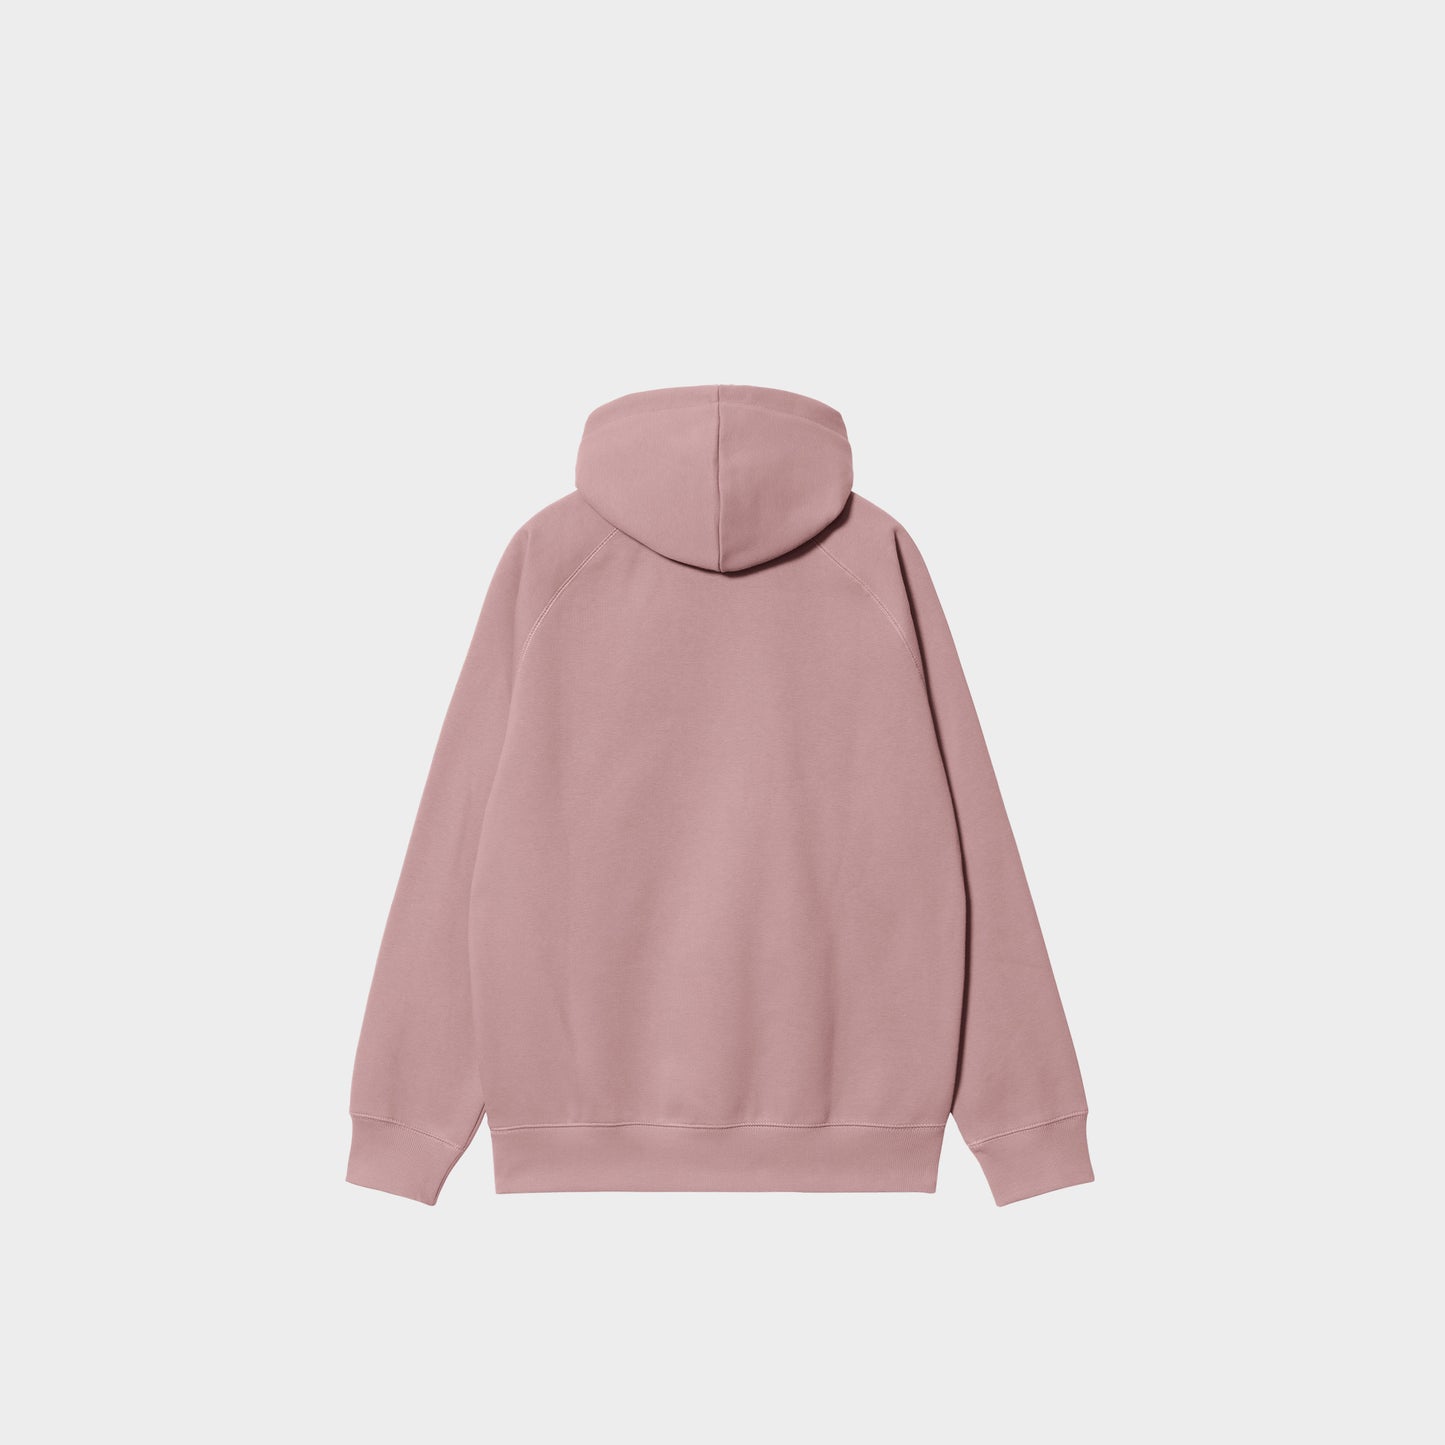 Carhartt WIP Hooded Chase Sweatshirt in Farbe glassy_Pink_Gold